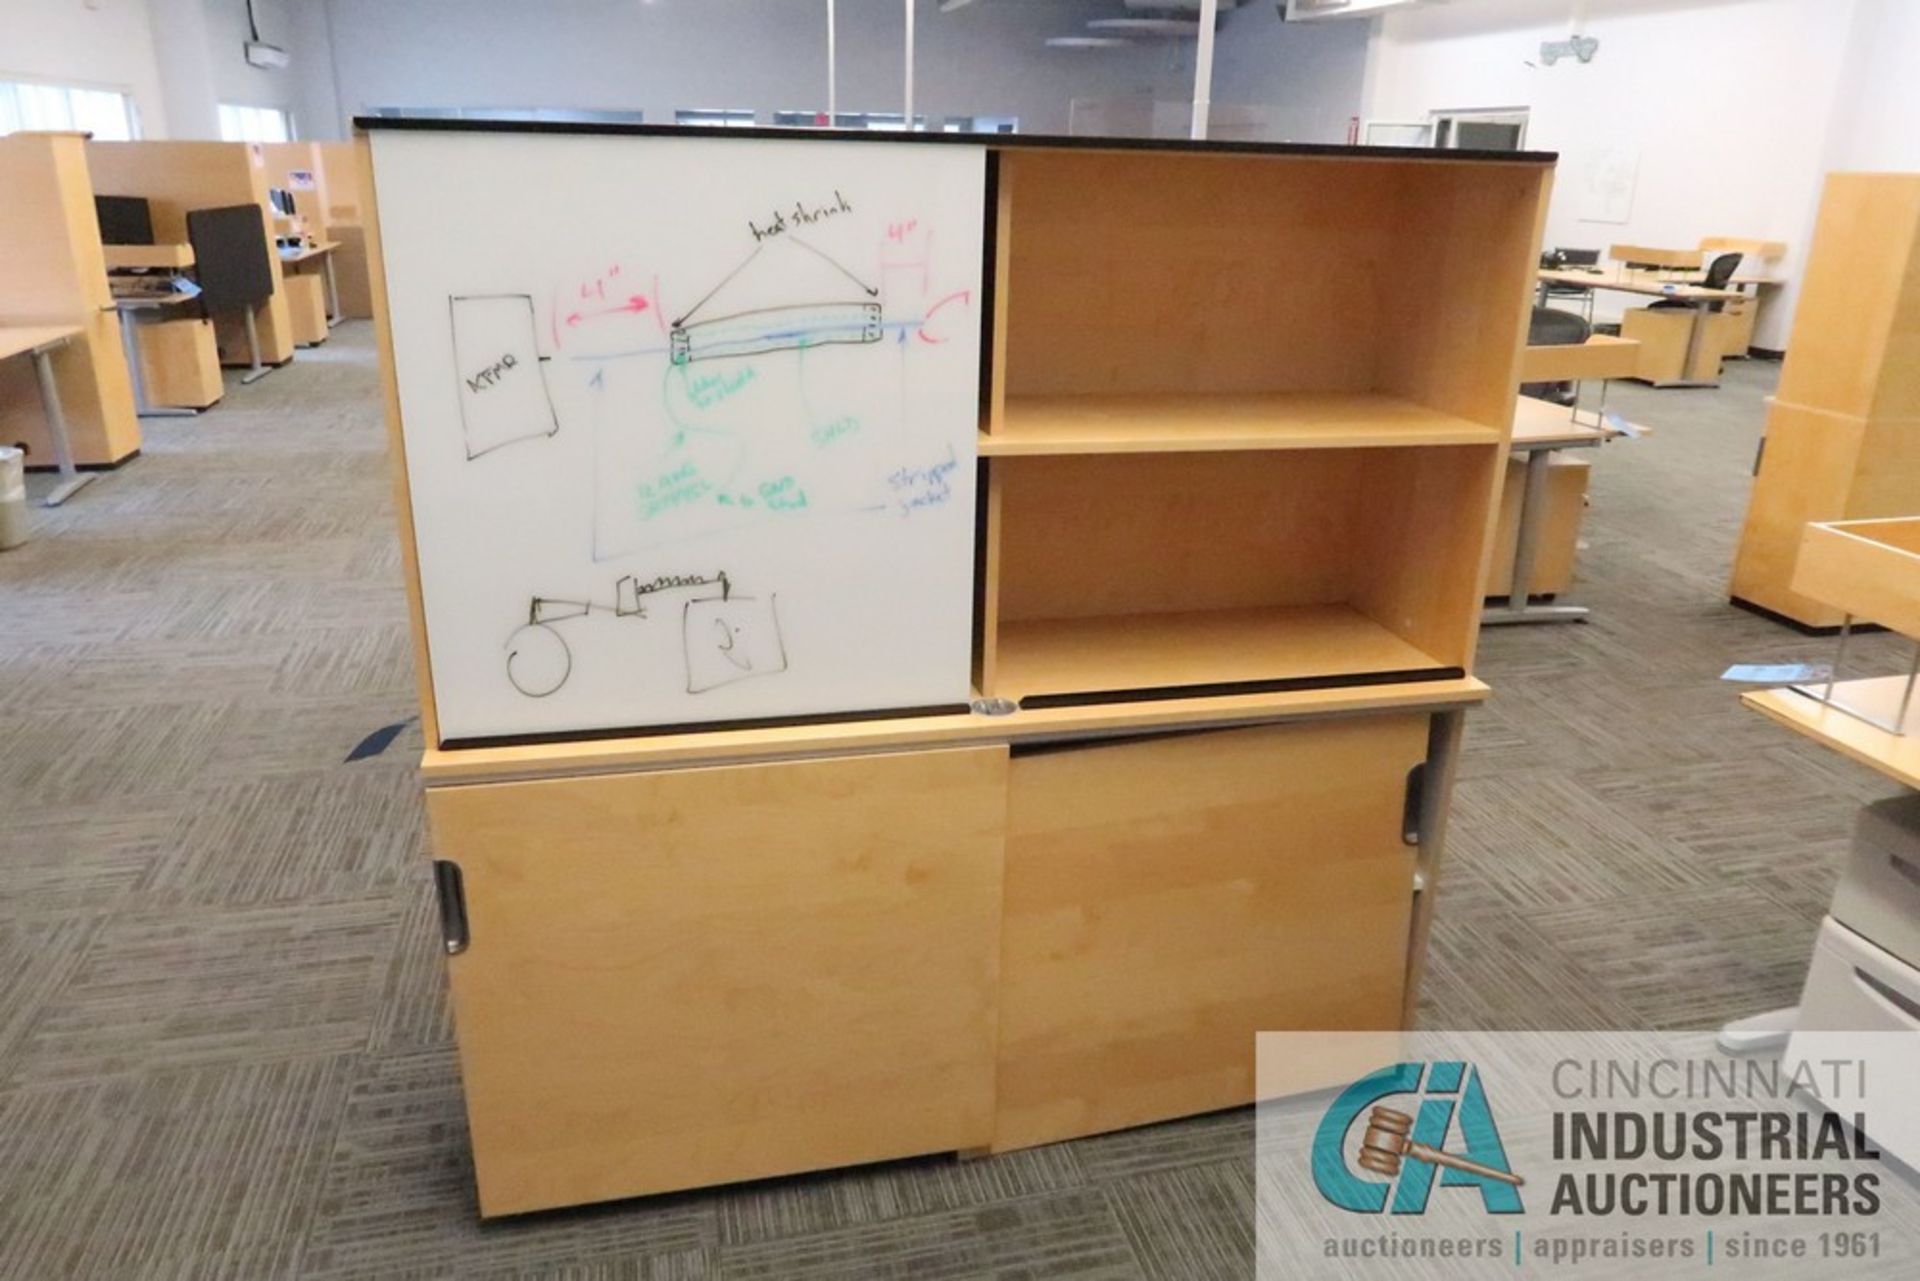 79" X 86" X 24" GALANT L-SHAPED DESKT, (1) 3-DRAWER CABINET, (1) 2-DRAWER CABINET, (1) BOOKCASE WITH - Image 6 of 6